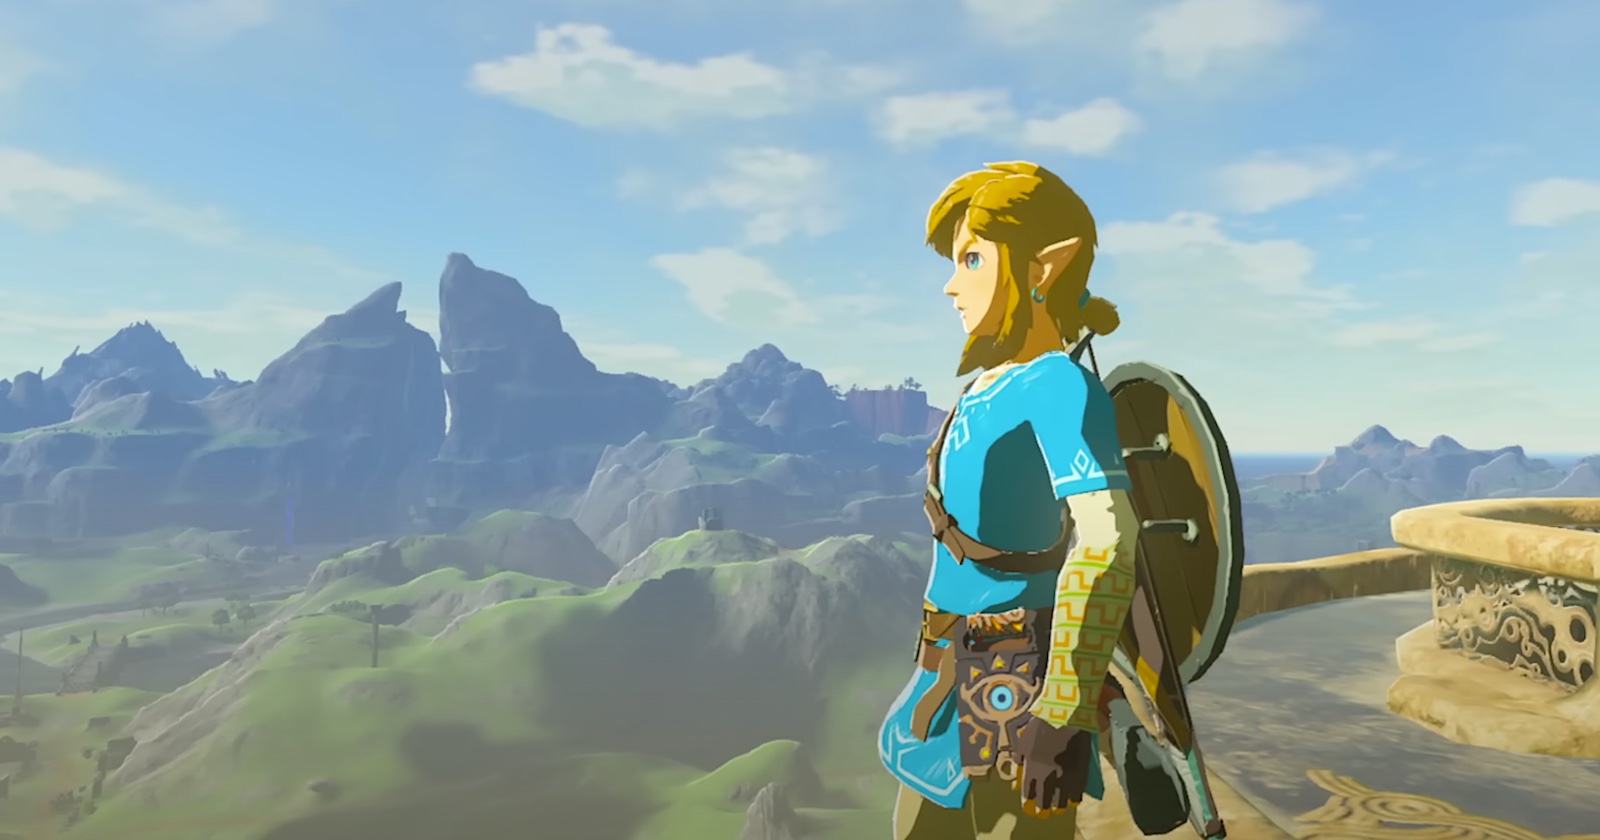 The Legend of Zelda' director aims for 'live-action Miyazaki